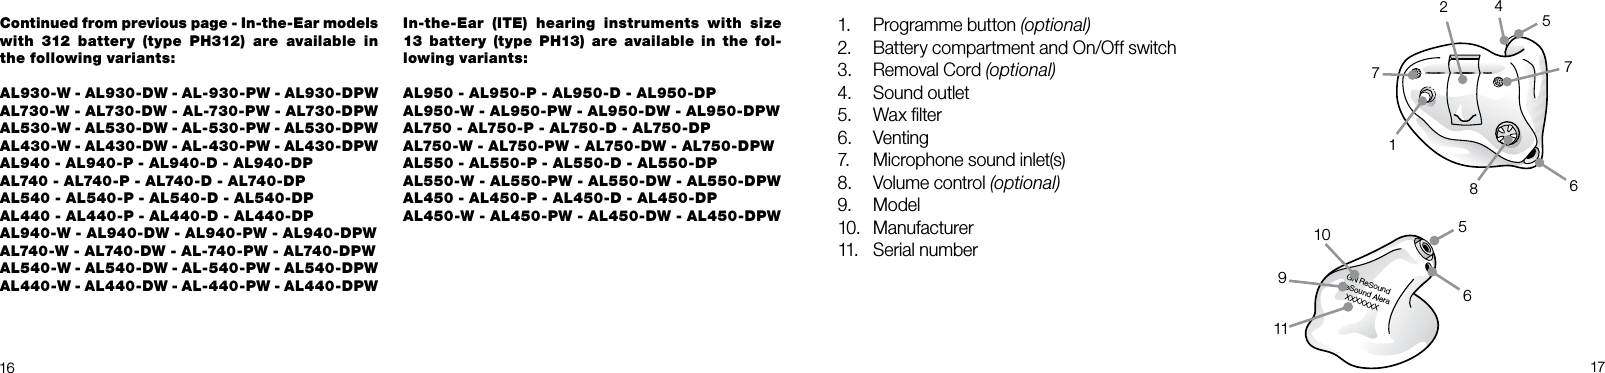 GN ReSoundReSound Alera XXXXXXX11109672481765516 17Continued from previous page - In-the-Ear models with 312 battery (type PH312) are available in the following variants:AL930-W - AL930-DW - AL-930-PW - AL930-DPWAL730-W - AL730-DW - AL-730-PW - AL730-DPWAL530-W - AL530-DW - AL-530-PW - AL530-DPWAL430-W - AL430-DW - AL-430-PW - AL430-DPW AL940 - AL940-P - AL940-D - AL940-DPAL740 - AL740-P - AL740-D - AL740-DPAL540 - AL540-P - AL540-D - AL540-DPAL440 - AL440-P - AL440-D - AL440-DPAL940-W - AL940-DW - AL940-PW - AL940-DPWAL740-W - AL740-DW - AL-740-PW - AL740-DPWAL540-W - AL540-DW - AL-540-PW - AL540-DPWAL440-W - AL440-DW - AL-440-PW - AL440-DPWIn-the-Ear (ITE) hearing instruments with size 13 battery (type PH13) are available in the fol-lowing variants:AL950 - AL950-P - AL950-D - AL950-DPAL950-W - AL950-PW - AL950-DW - AL950-DPWAL750 - AL750-P - AL750-D - AL750-DPAL750-W - AL750-PW - AL750-DW - AL750-DPWAL550 - AL550-P - AL550-D - AL550-DPAL550-W - AL550-PW - AL550-DW - AL550-DPWAL450 - AL450-P - AL450-D - AL450-DPAL450-W - AL450-PW - AL450-DW - AL450-DPW1.  Programme button (optional)2.  Battery compartment and On/Off switch3.  Removal Cord (optional)4.  Sound outlet5.  Wax ﬁlter6.  Venting7.  Microphone sound inlet(s)8.  Volume control (optional)9.  Model10.  Manufacturer11.  Serial number